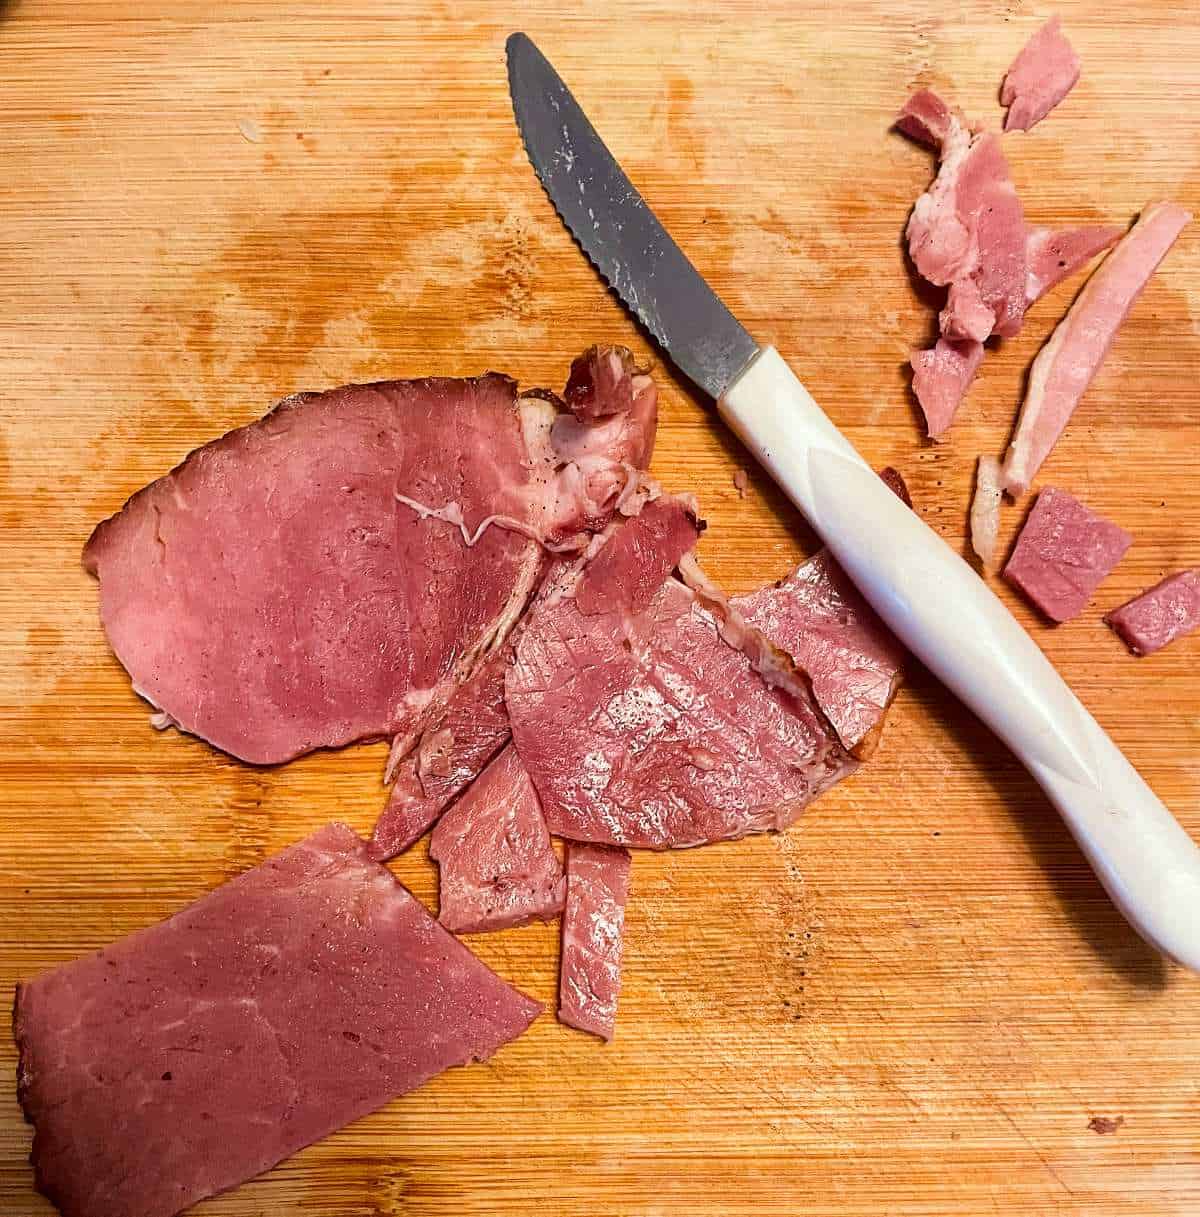 slices of ham on a wooden cutting board.